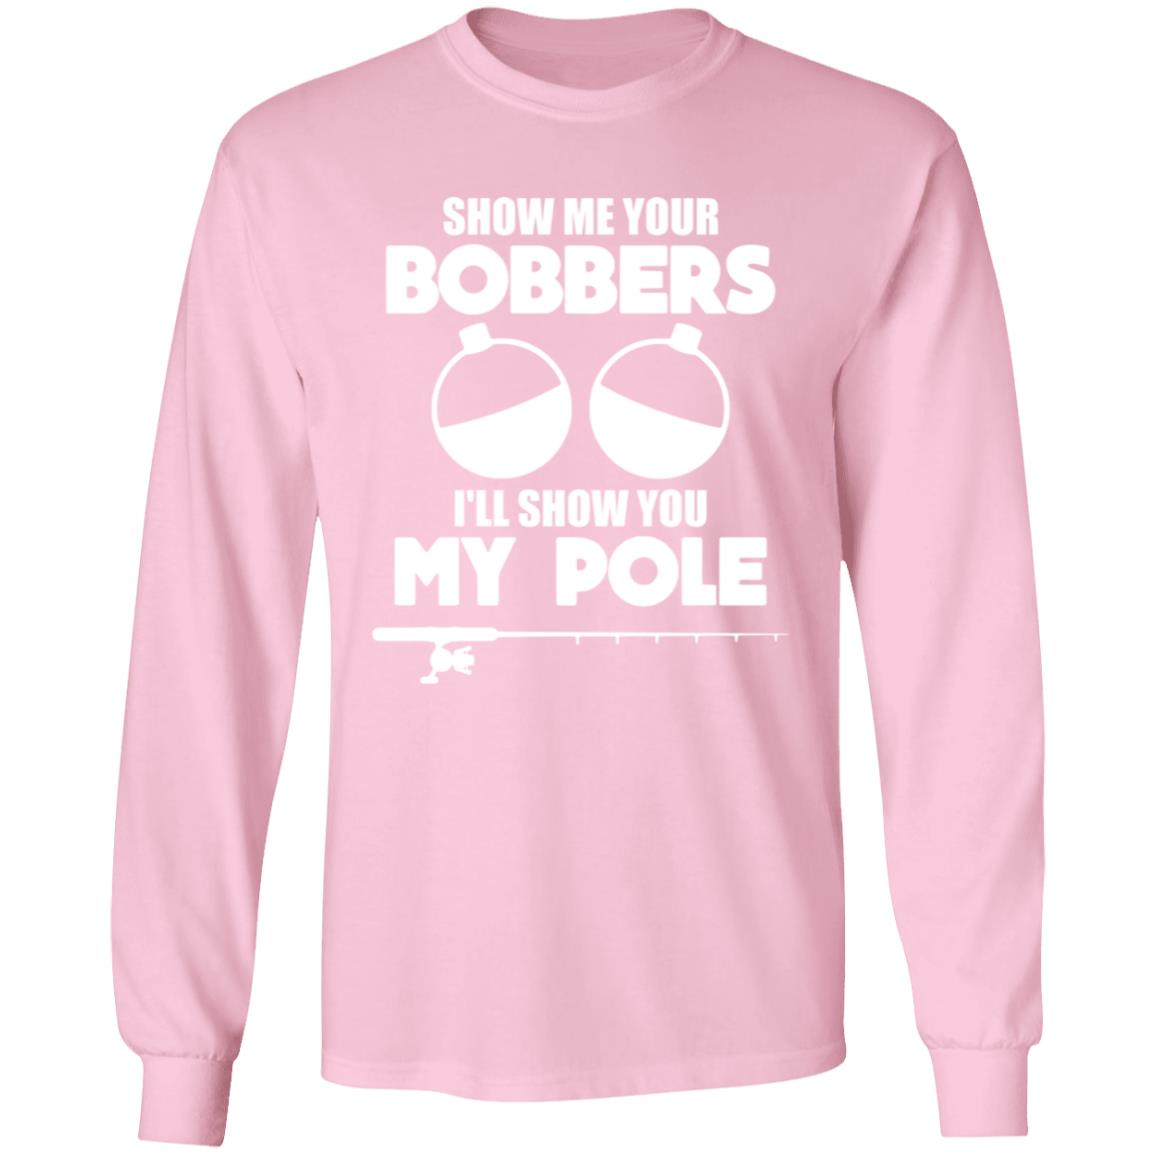 HRCL FL - Show Me Your Bobbers I'll Show You My Pole - 2 Sided G540 LS T-Shirt 5.3 oz.